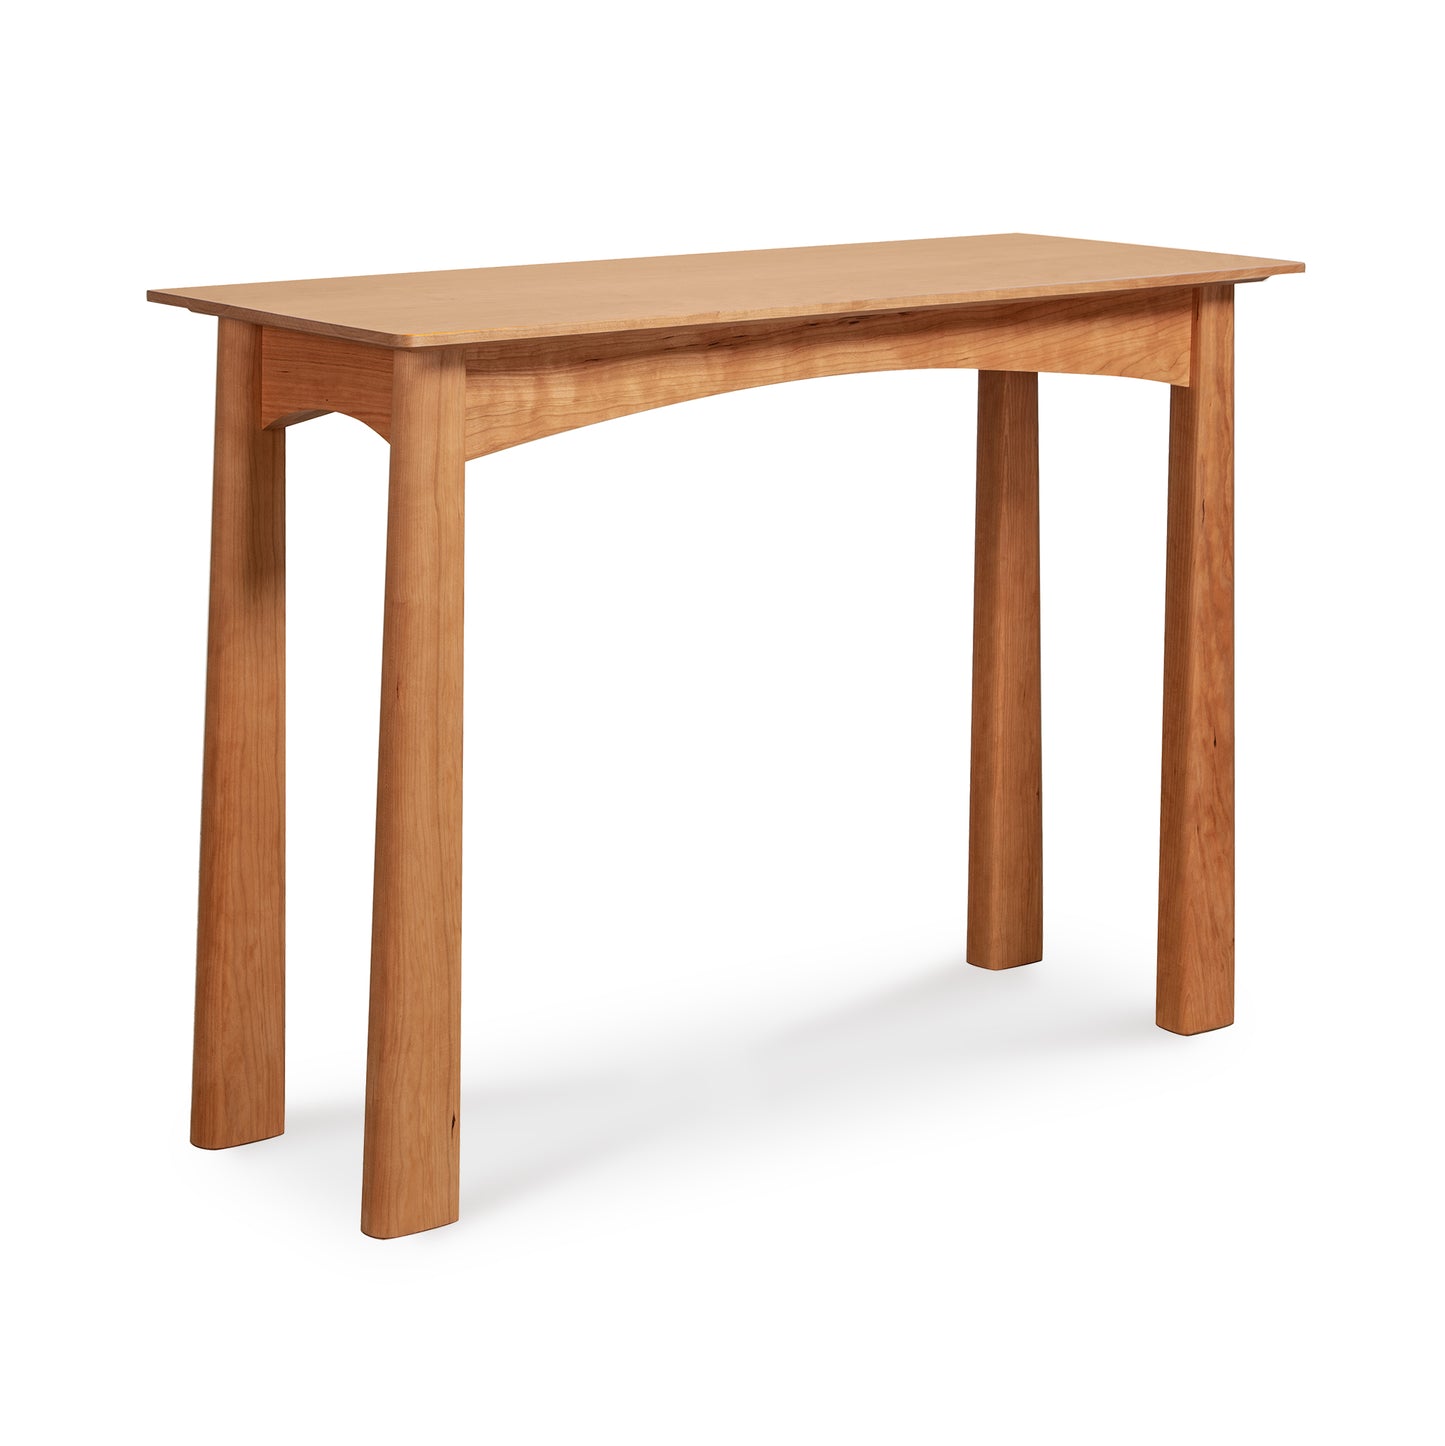 A Cherry Moon Sofa Table from Maple Corner Woodworks with a simple, rectangular top and four sturdy legs, set against a plain white background. The wood has a warm, honey-colored finish.